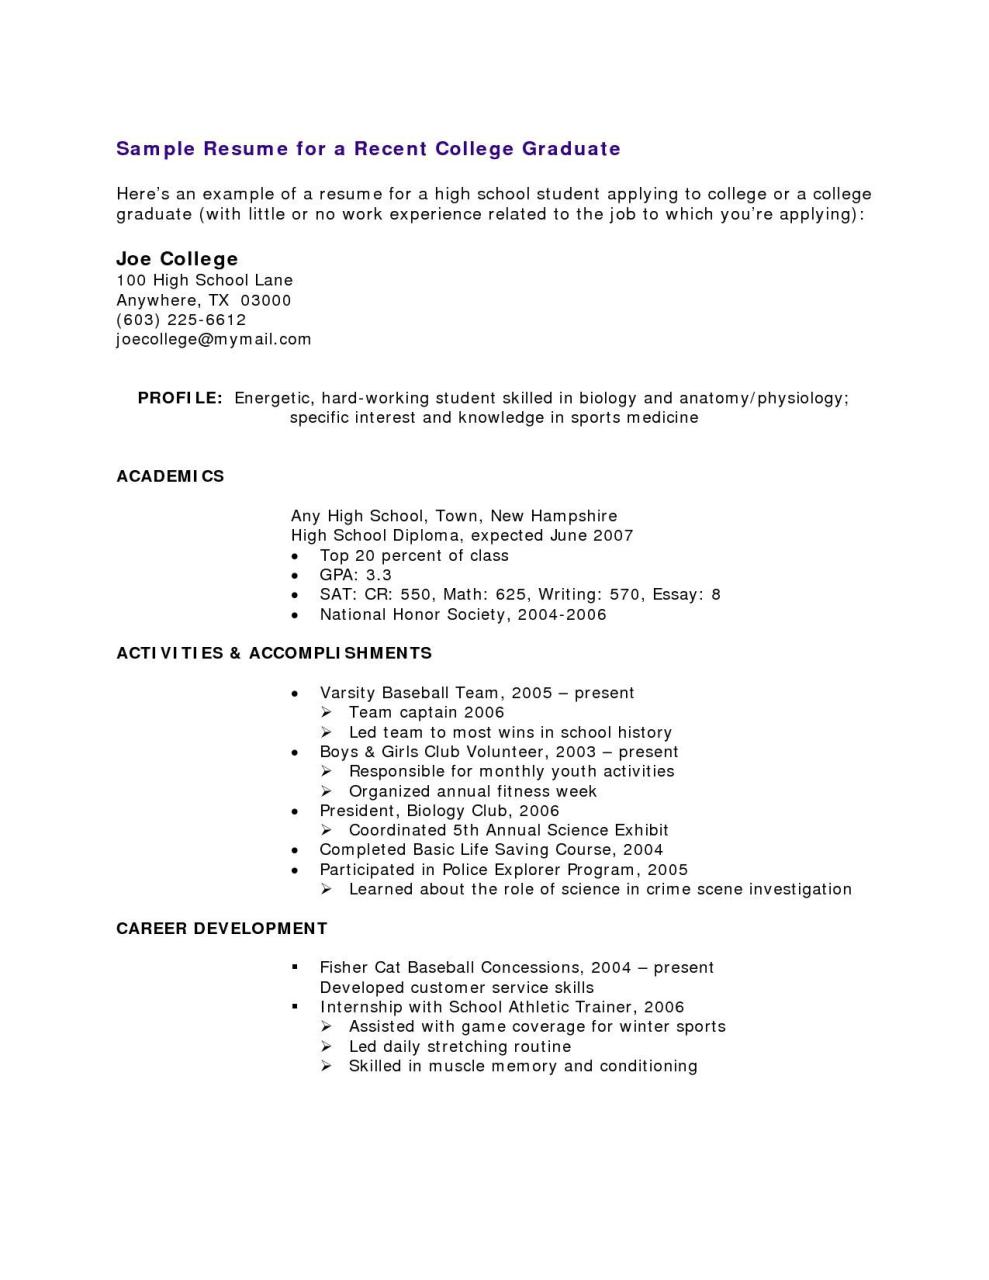 What Is The Most Commonly Used Resume Format